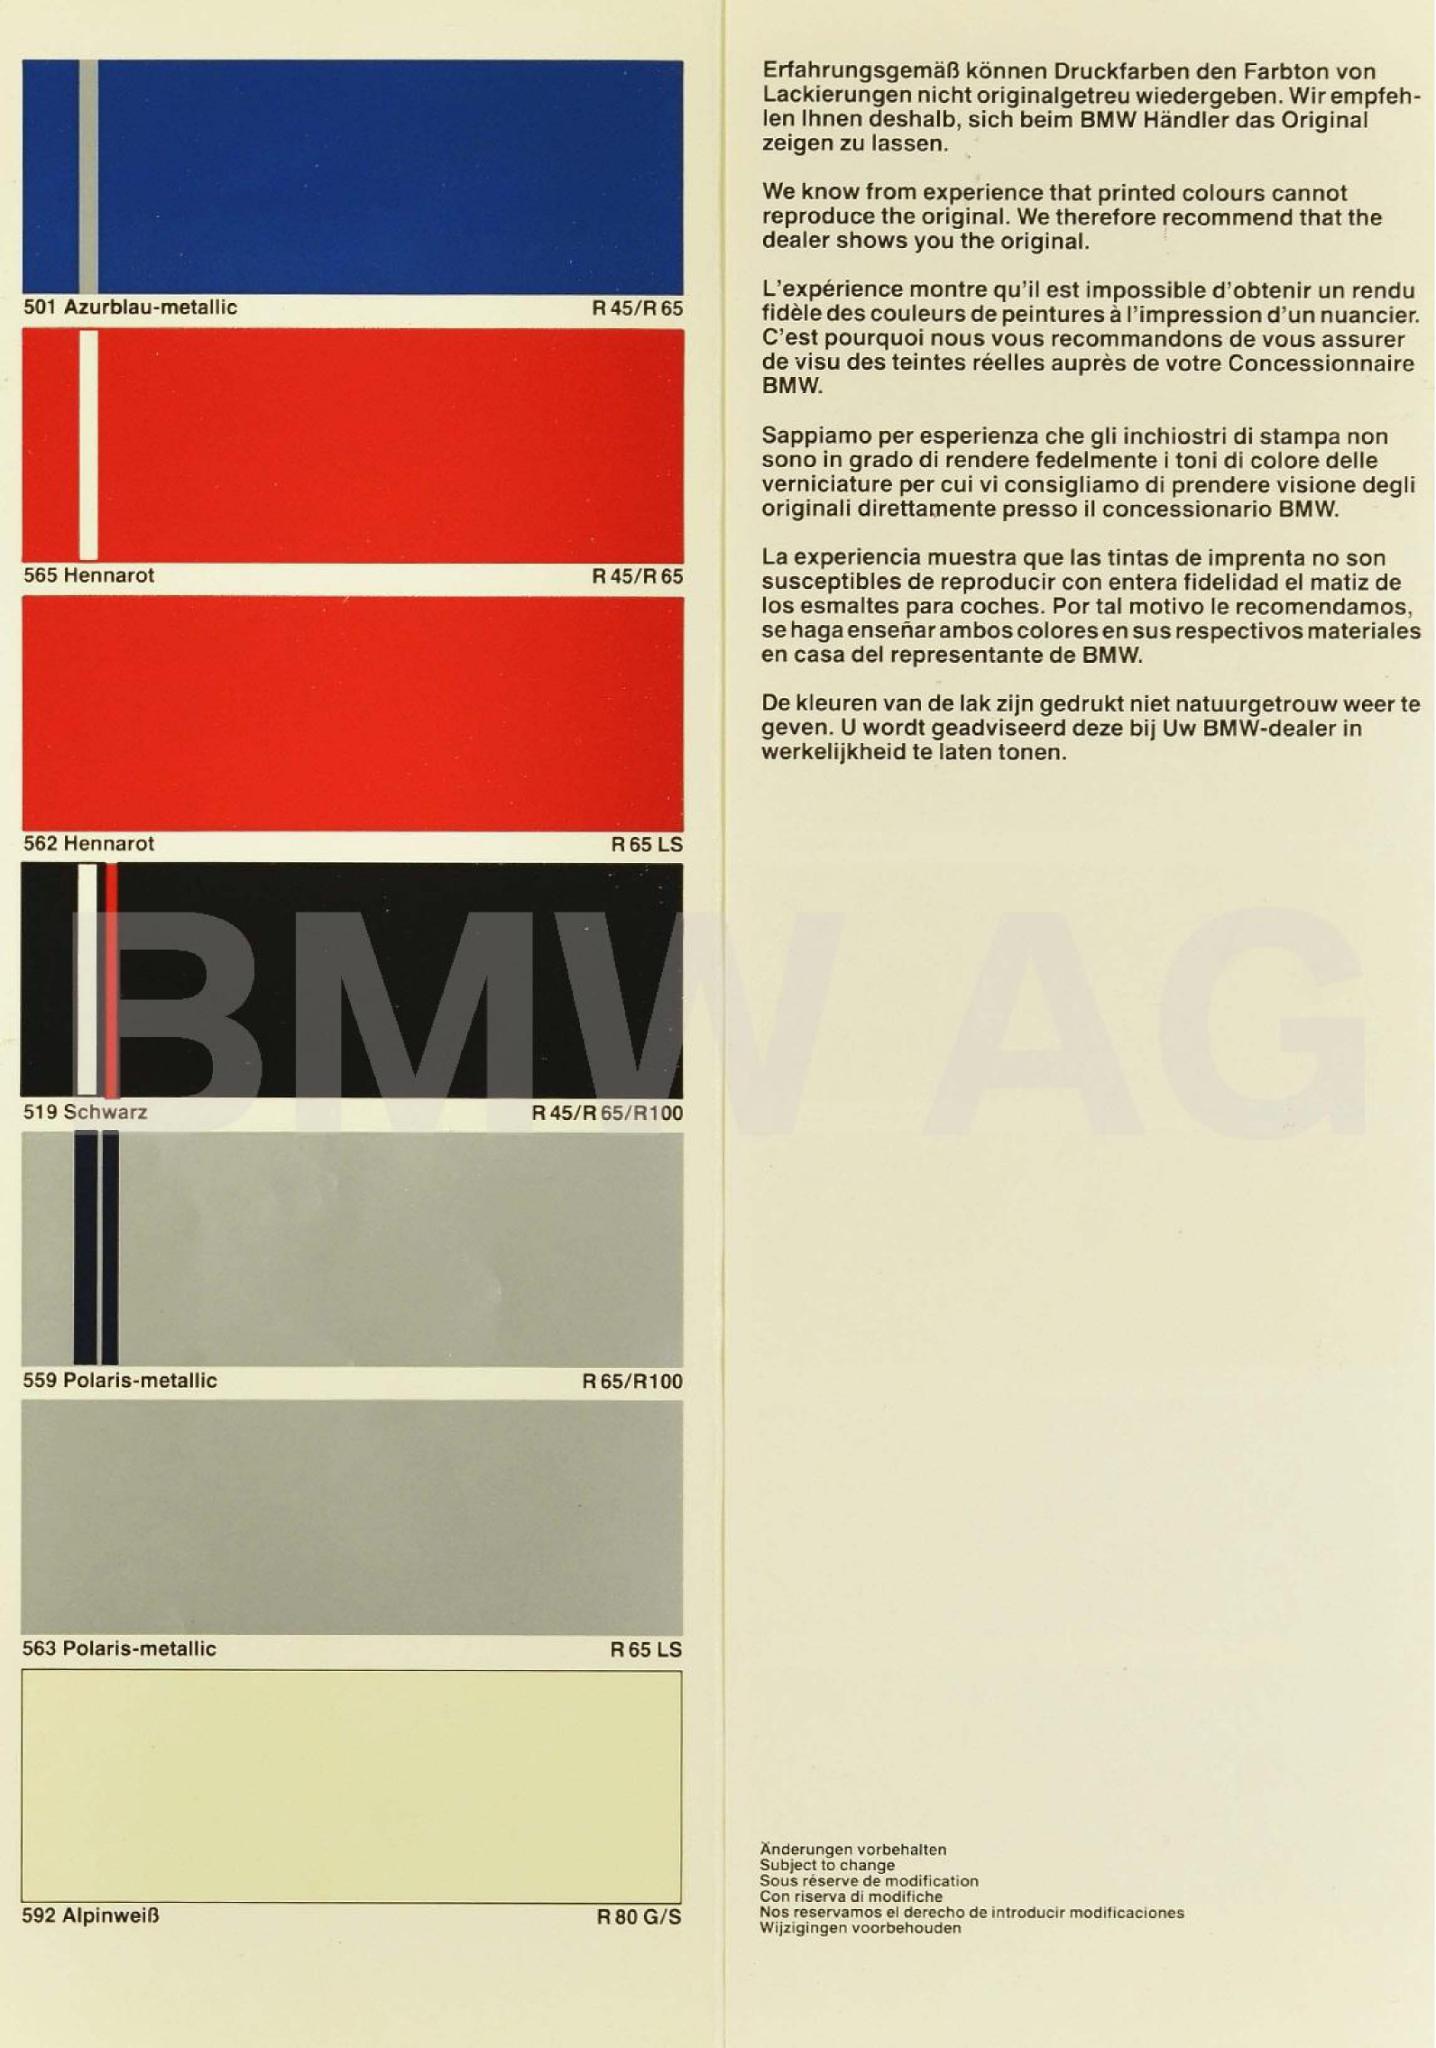 Colors used on BMW Motorcycles in 1982